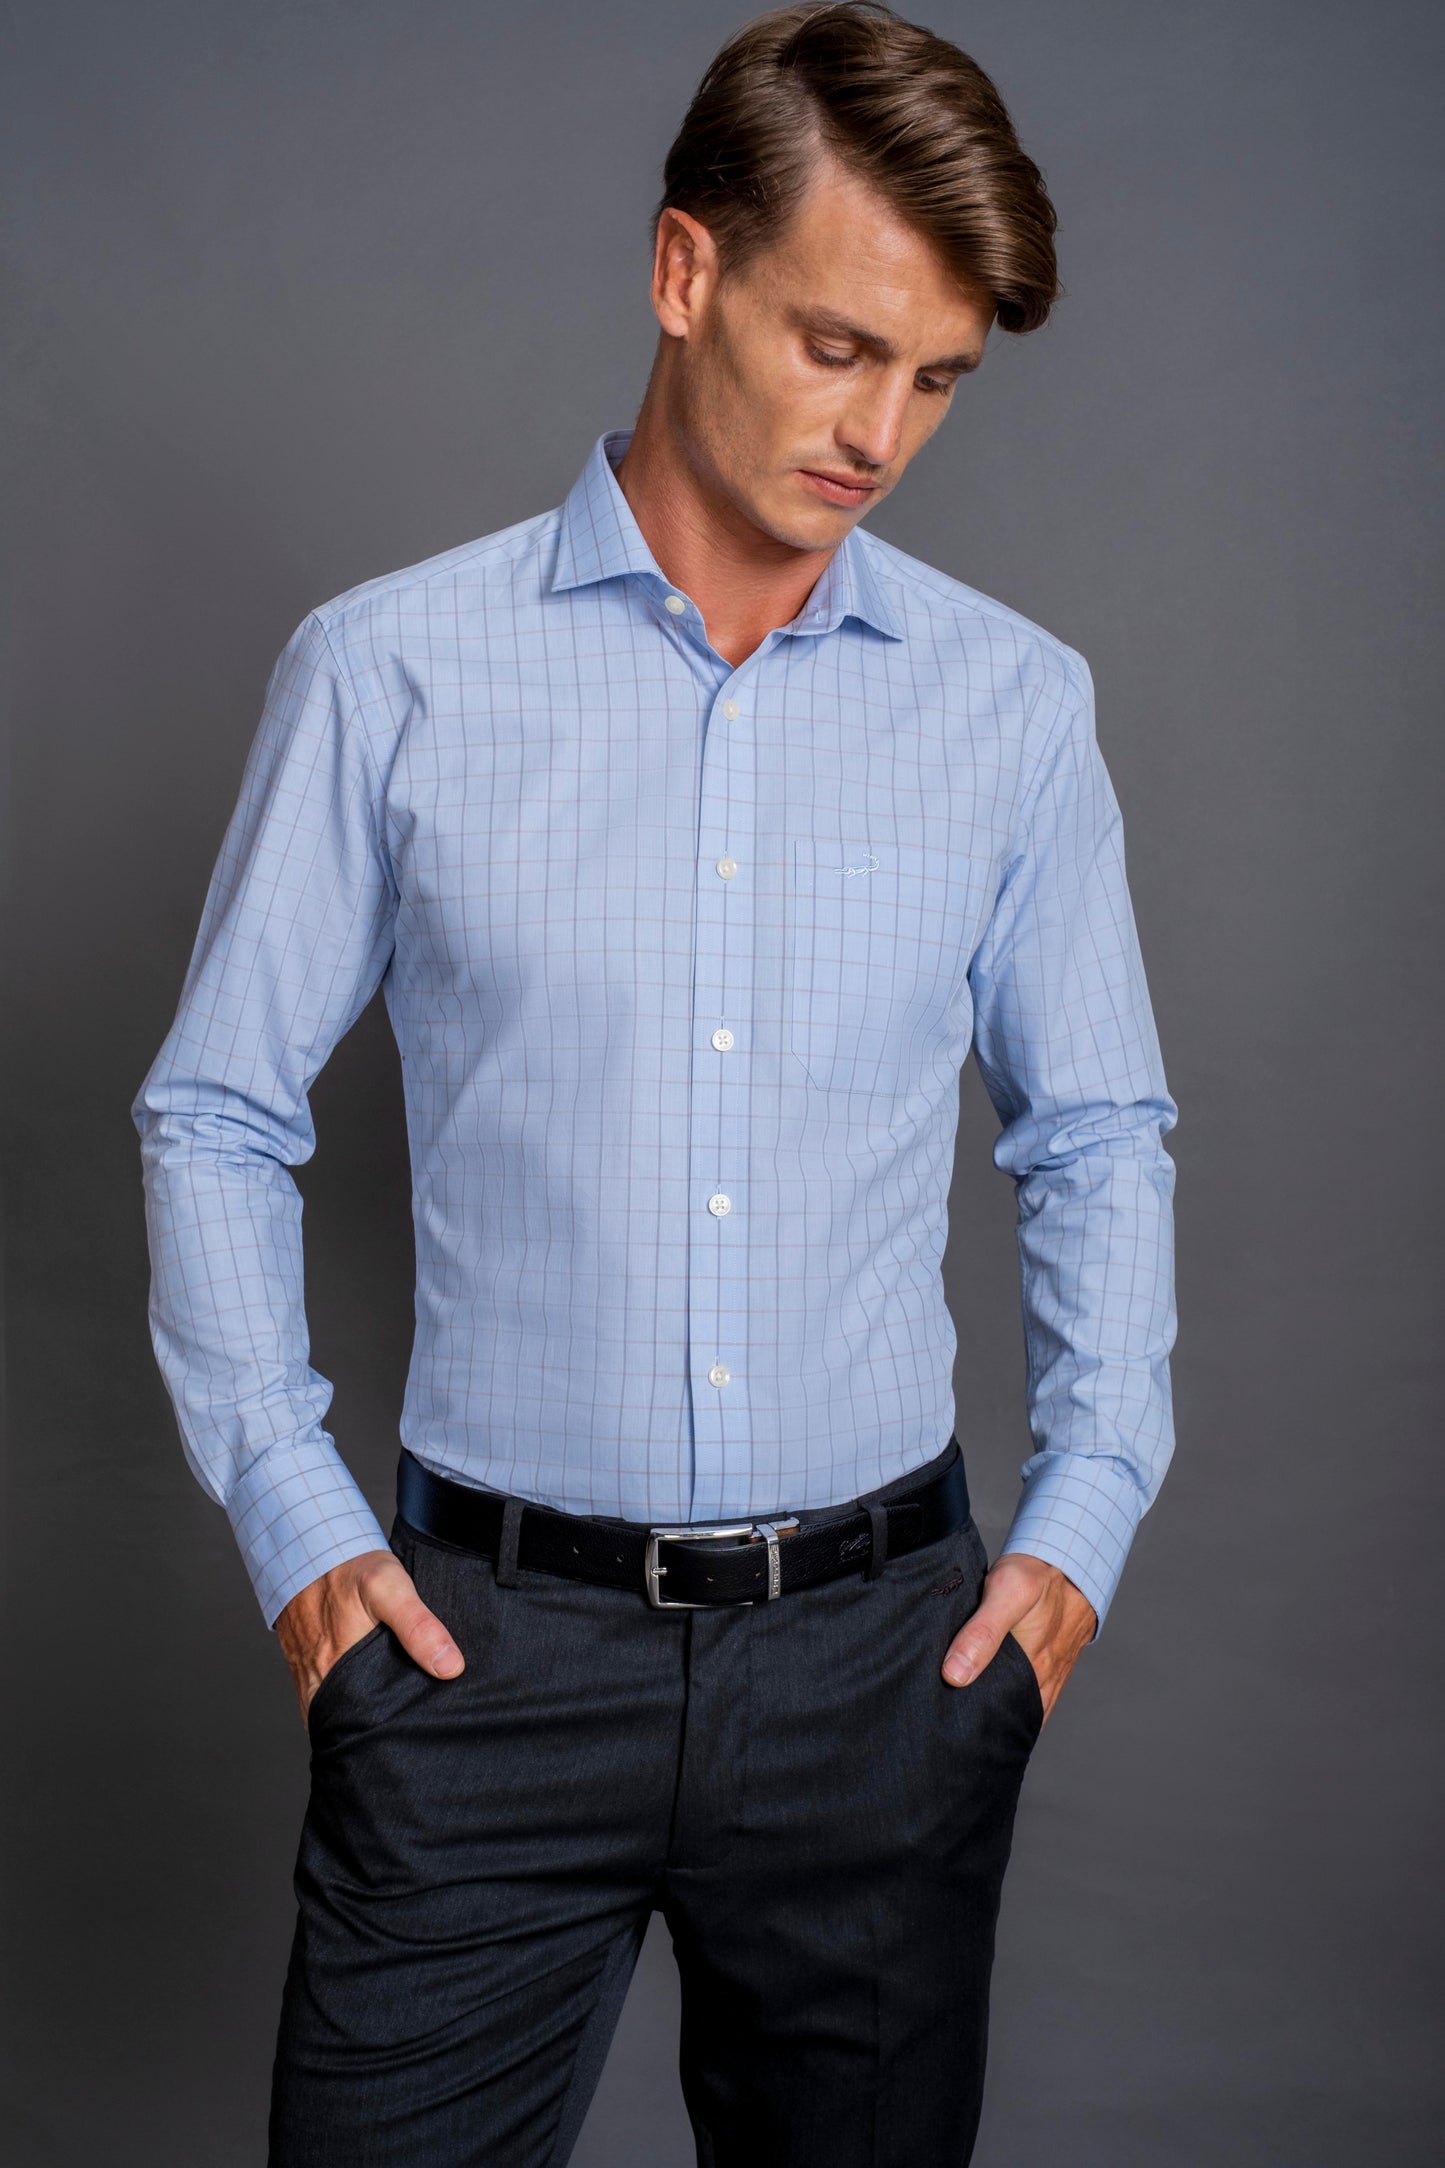 Slim Fit Long sleeves-Formal Shirts-Blue Cashmere